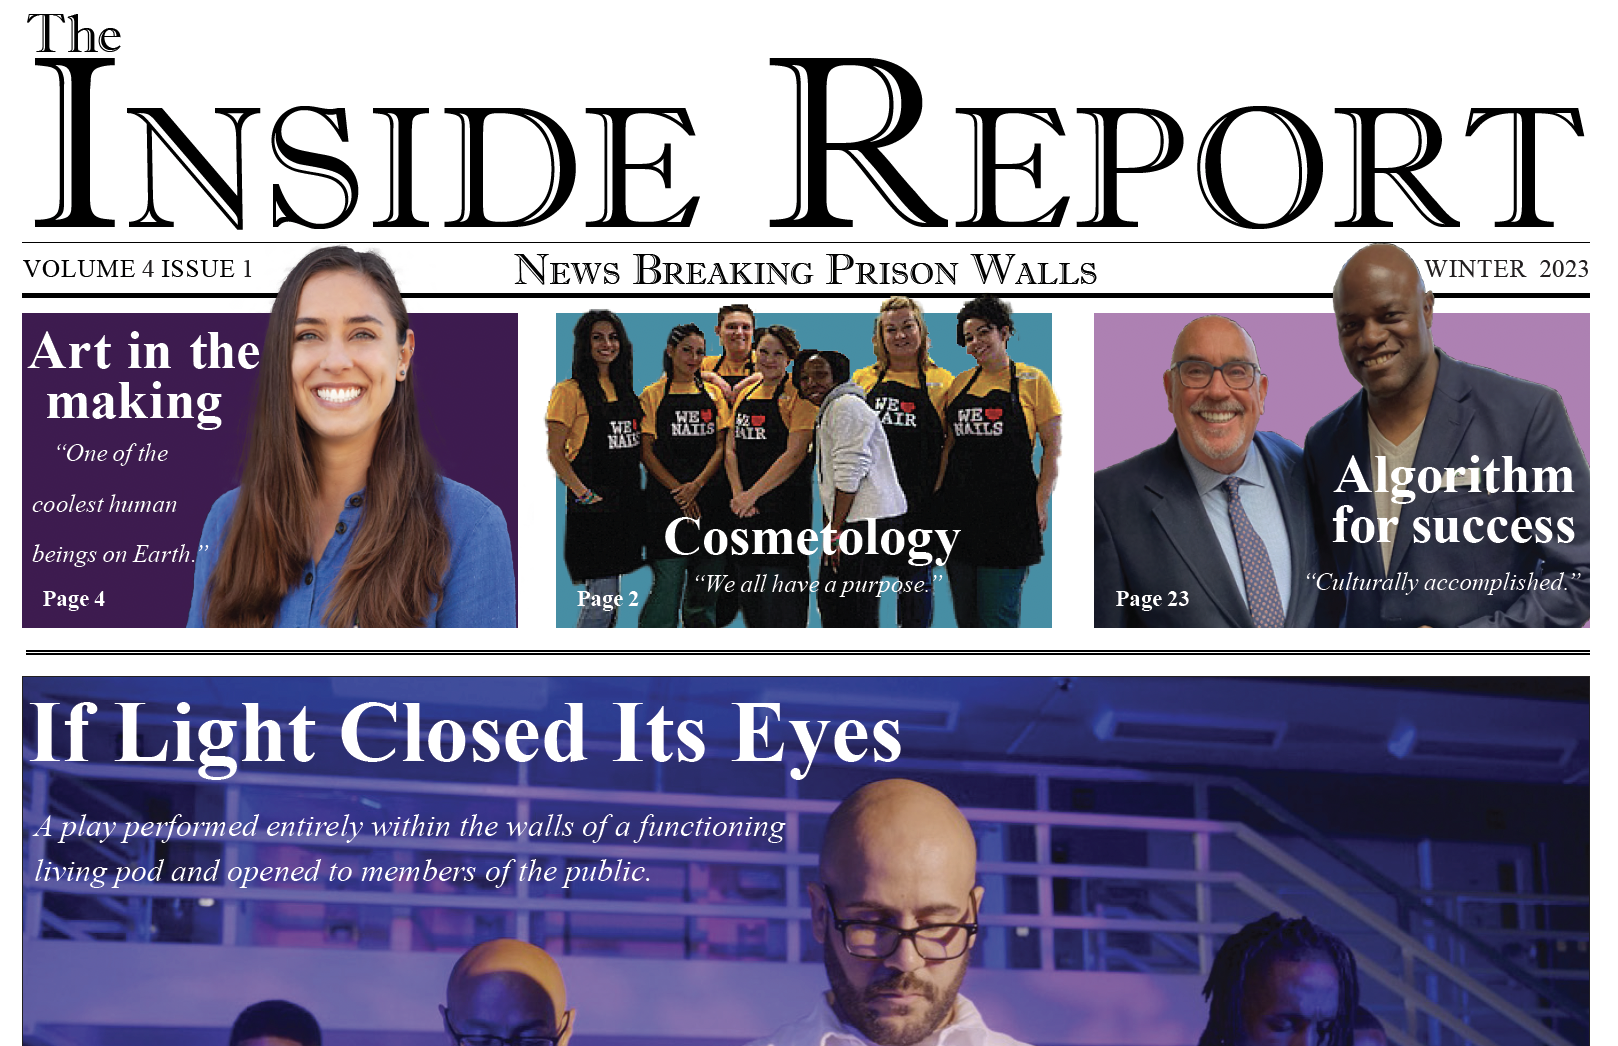 The Inside Report Volume 4 Issue 1 cover page